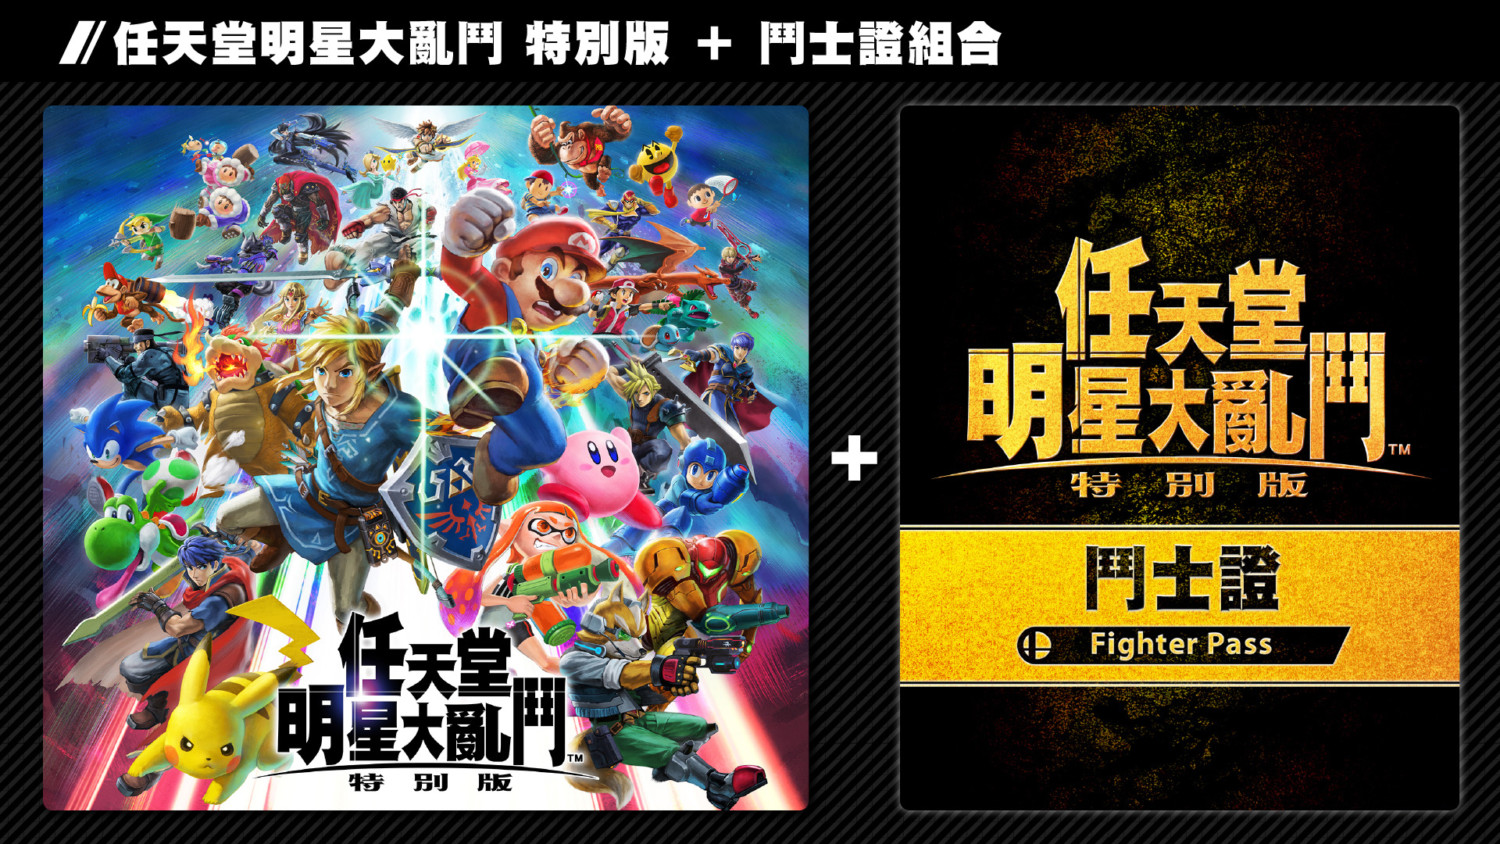 Super Smash Bros. Ultimate And Fighters Pass Bundle Confirmed For Hong Kong  And South Korea – NintendoSoup